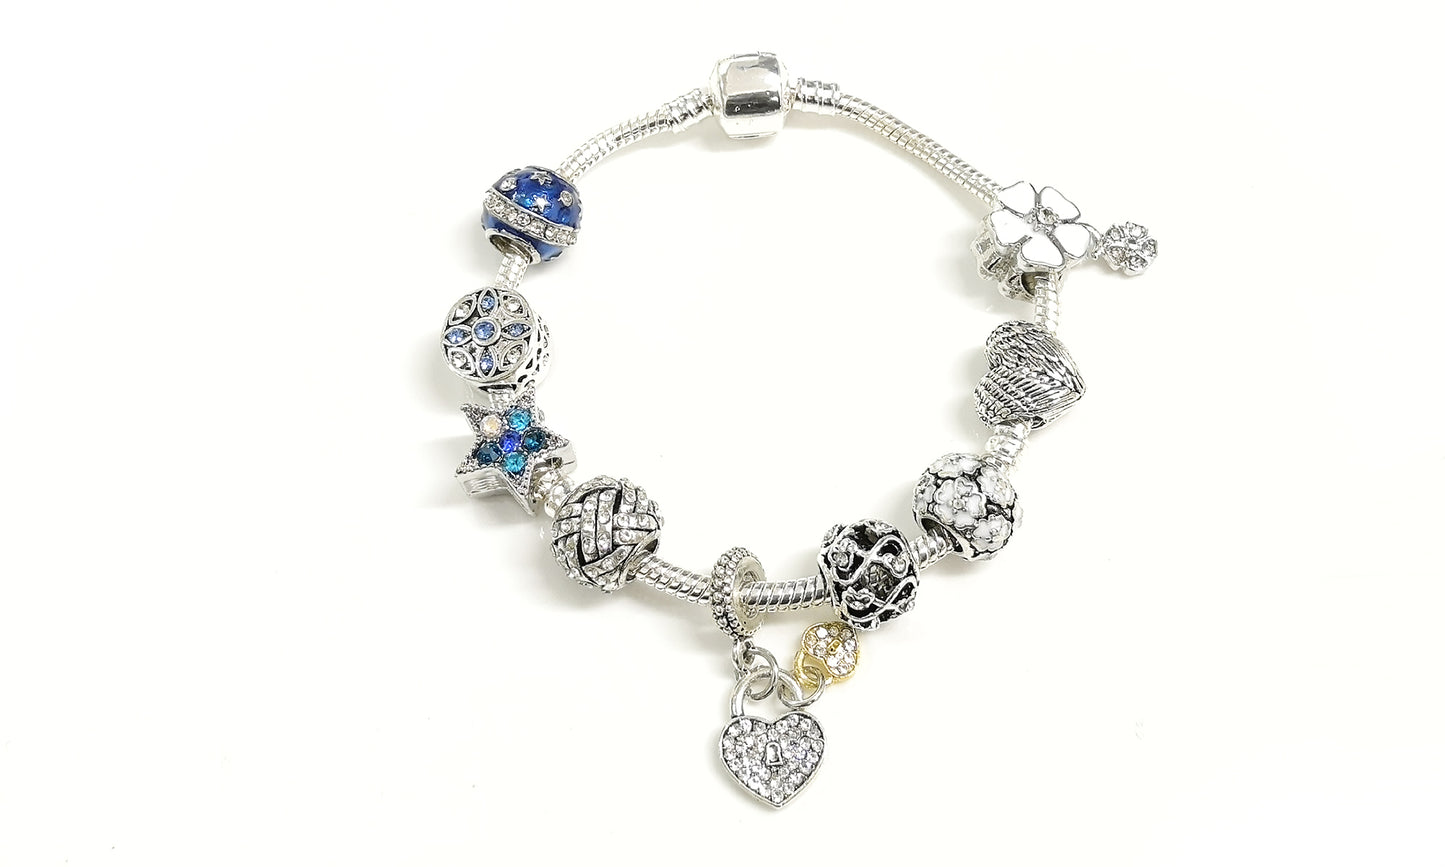 Merry Christmas Charm Bracelet Box Set Encrusted with Crystals from Swarovski